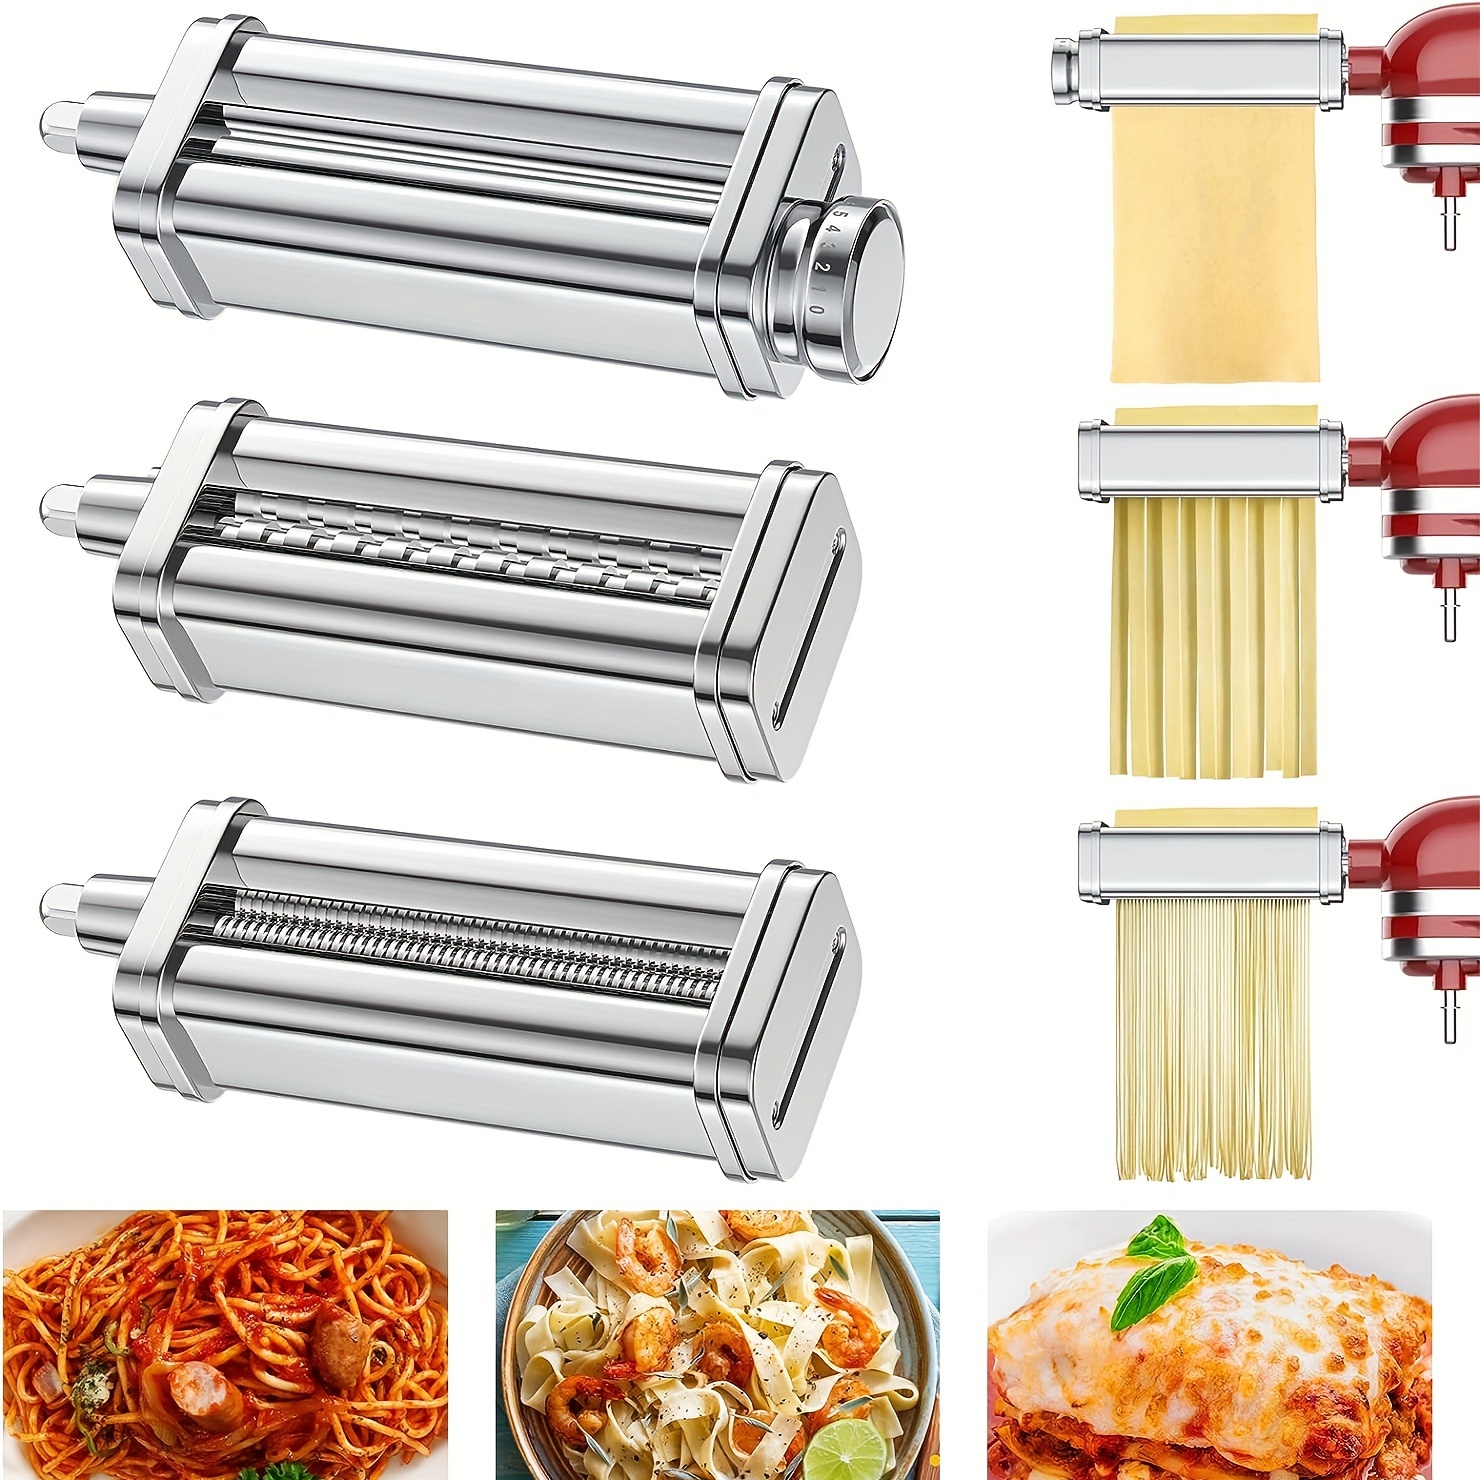 KitchenAid 3-Piece Gray Pasta Roller and Cutter Attachments for